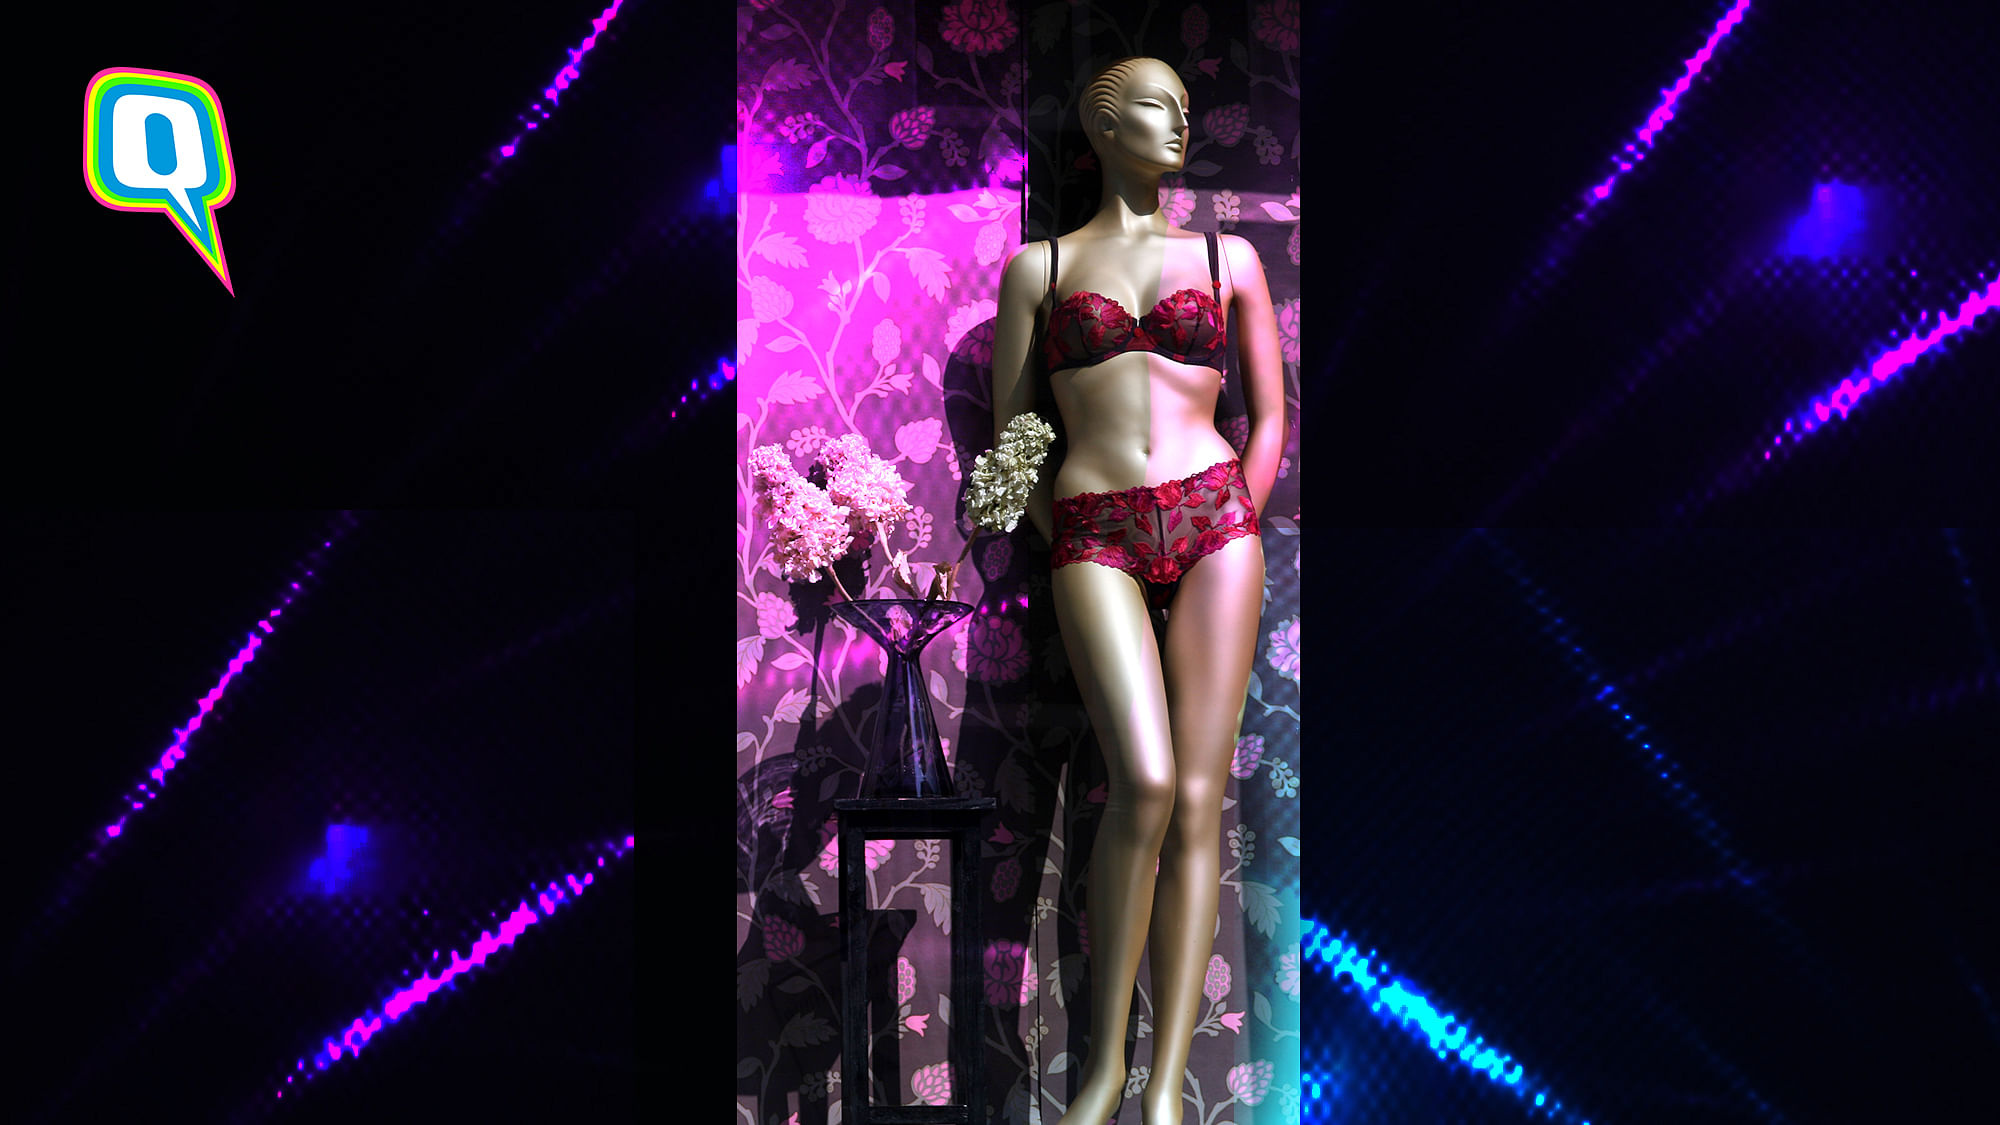 The future of mannequins wearing lingerie in Mumbai is hanging by a thread, which, if you think about it, is also quite an excellent metaphor to describe a thong!